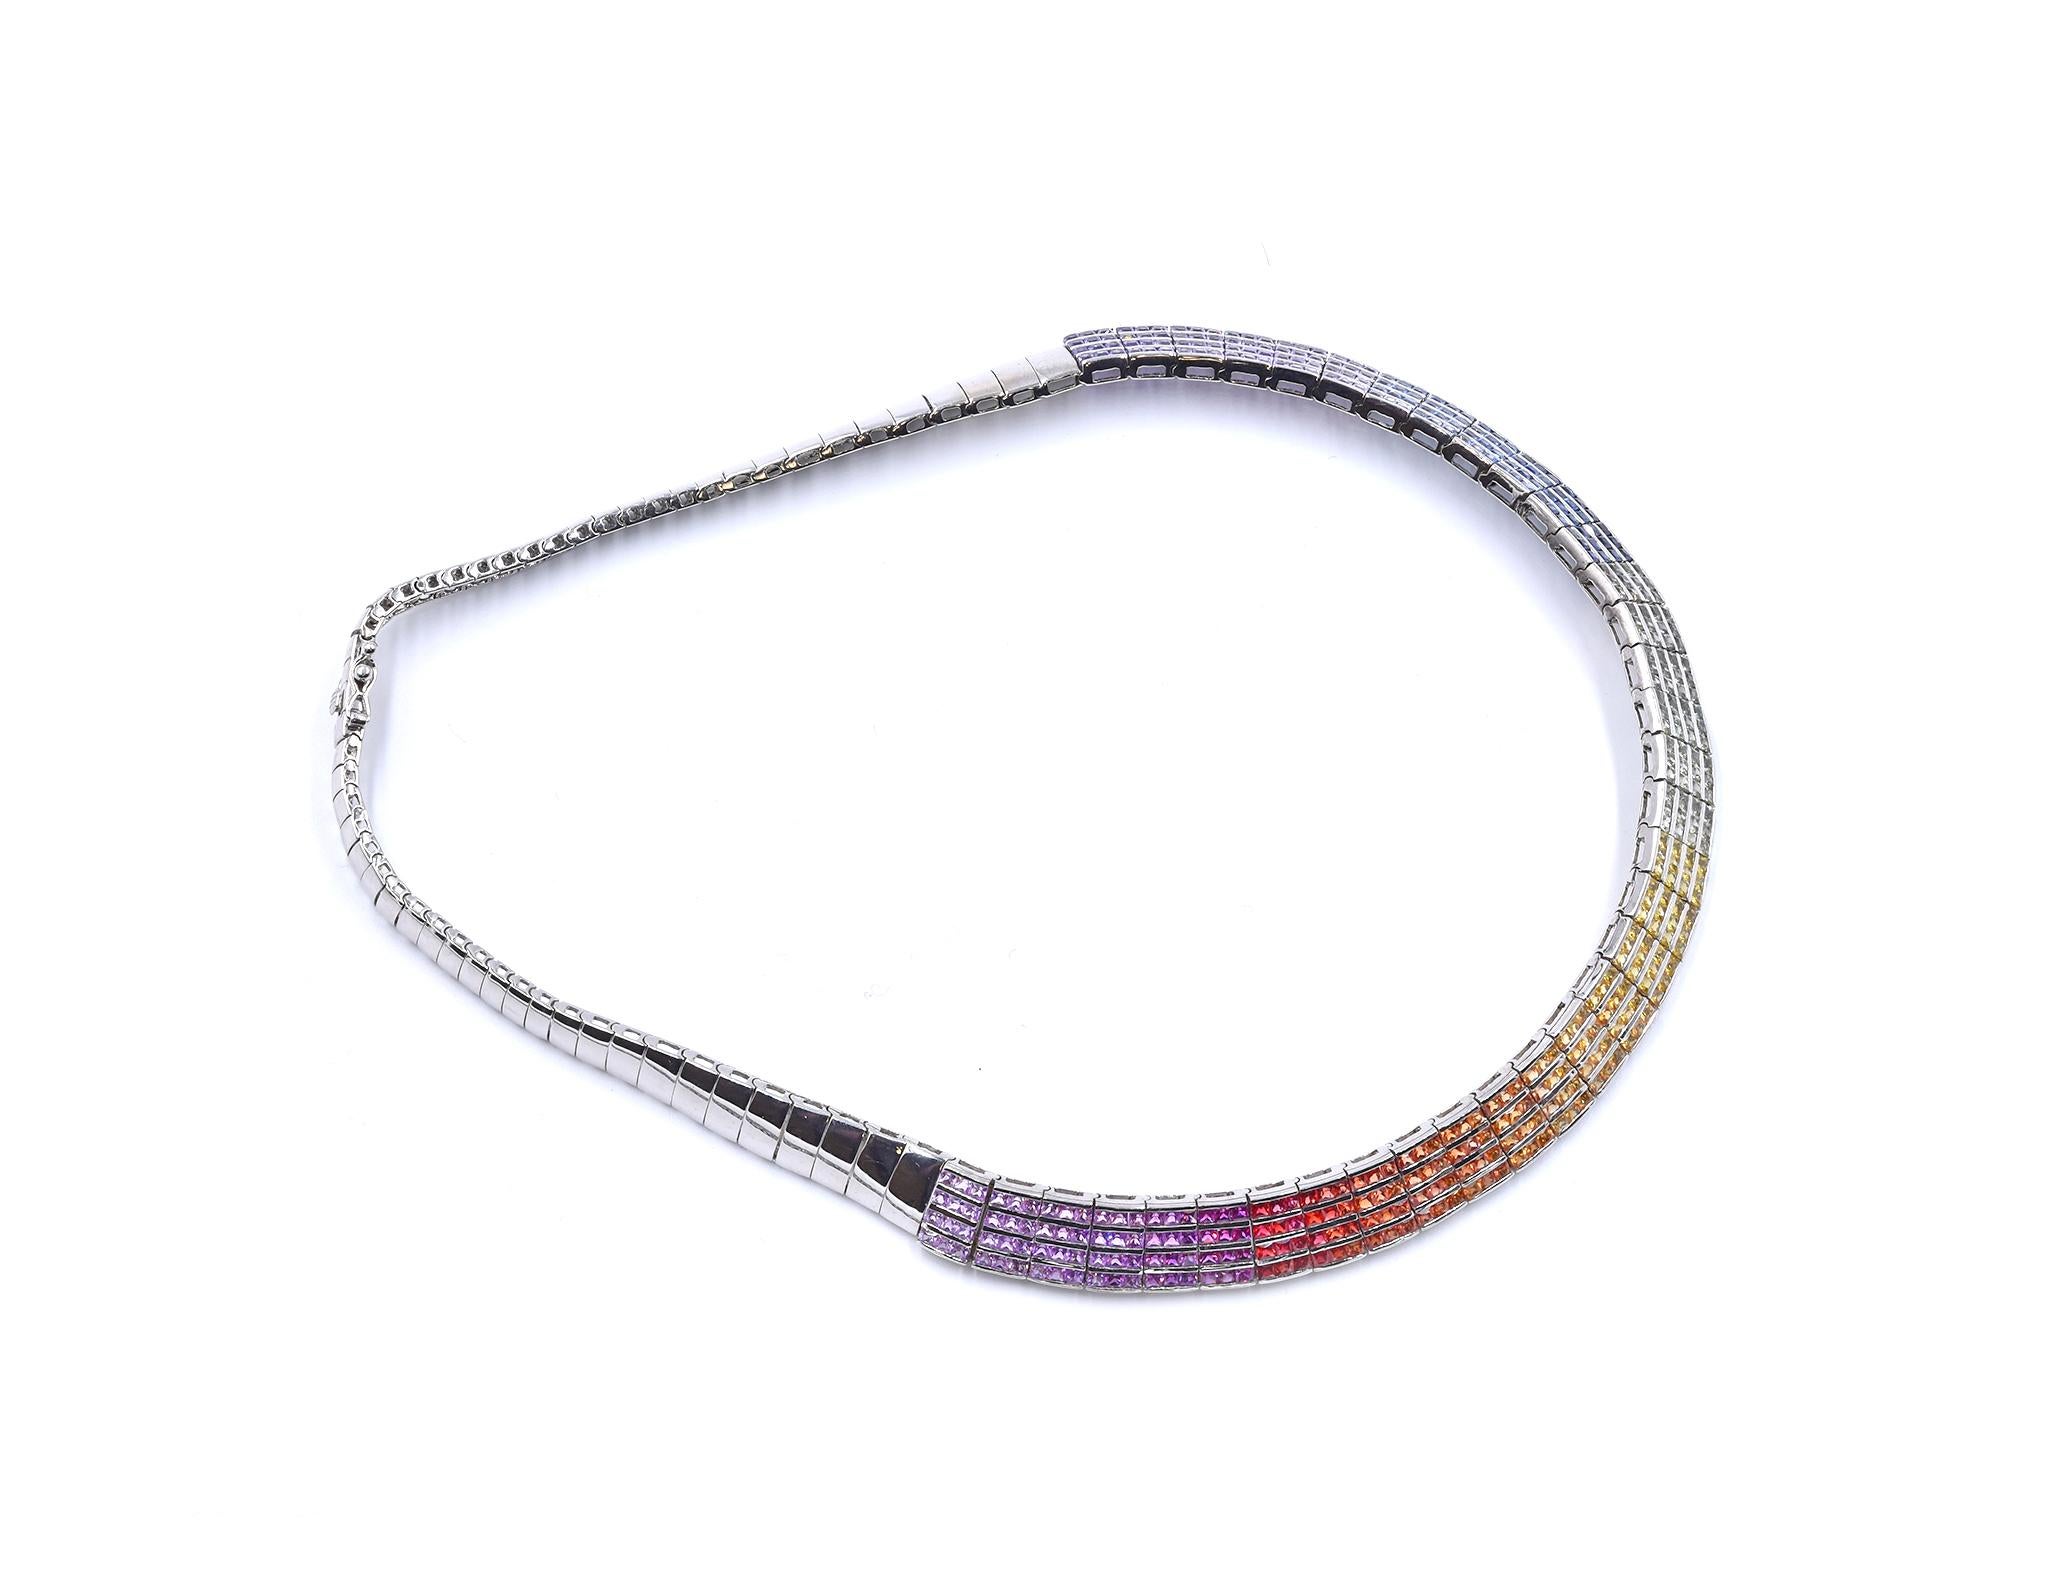 Designer: custom 
Material: 14K white gold
Diamond: 456 princess cut = 45.60cttw
Color: rainbow
Clarity: AAA+
Dimensions: necklace measures 16-inches long 
Weight: 54.16 grams